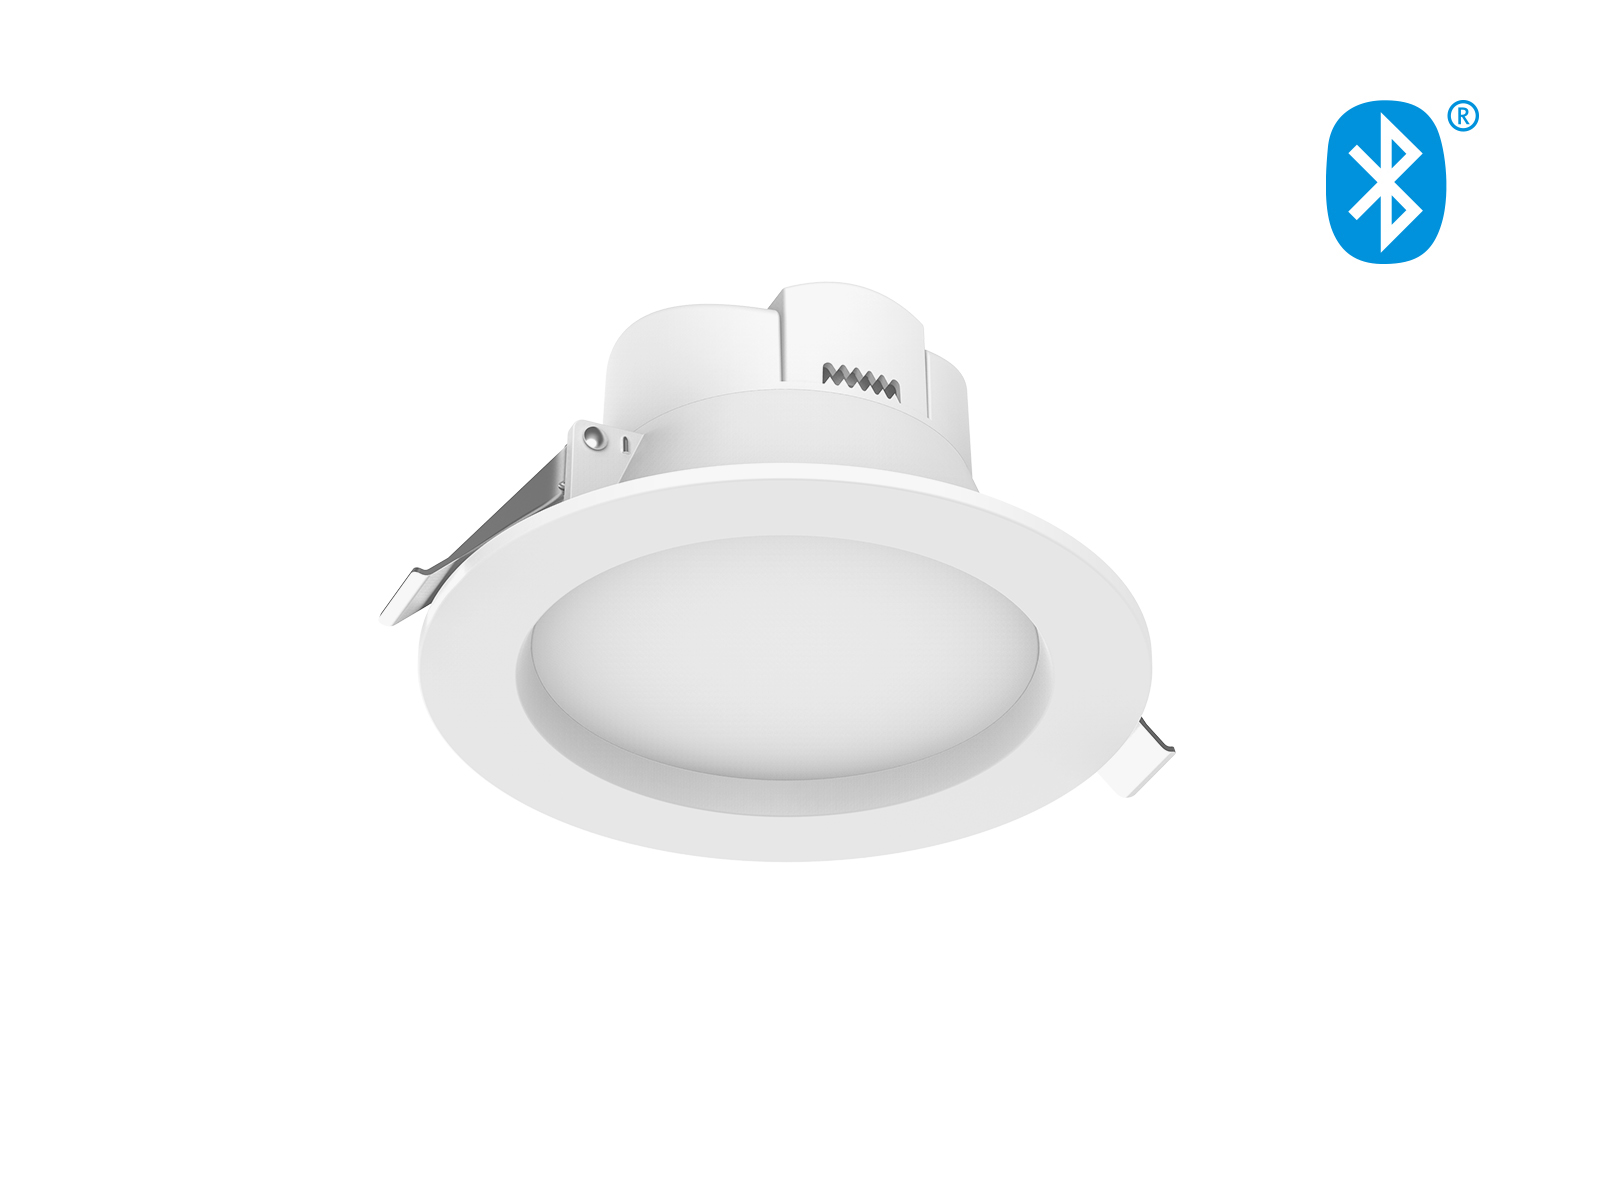 Bluetooth enabled downlight fixtures